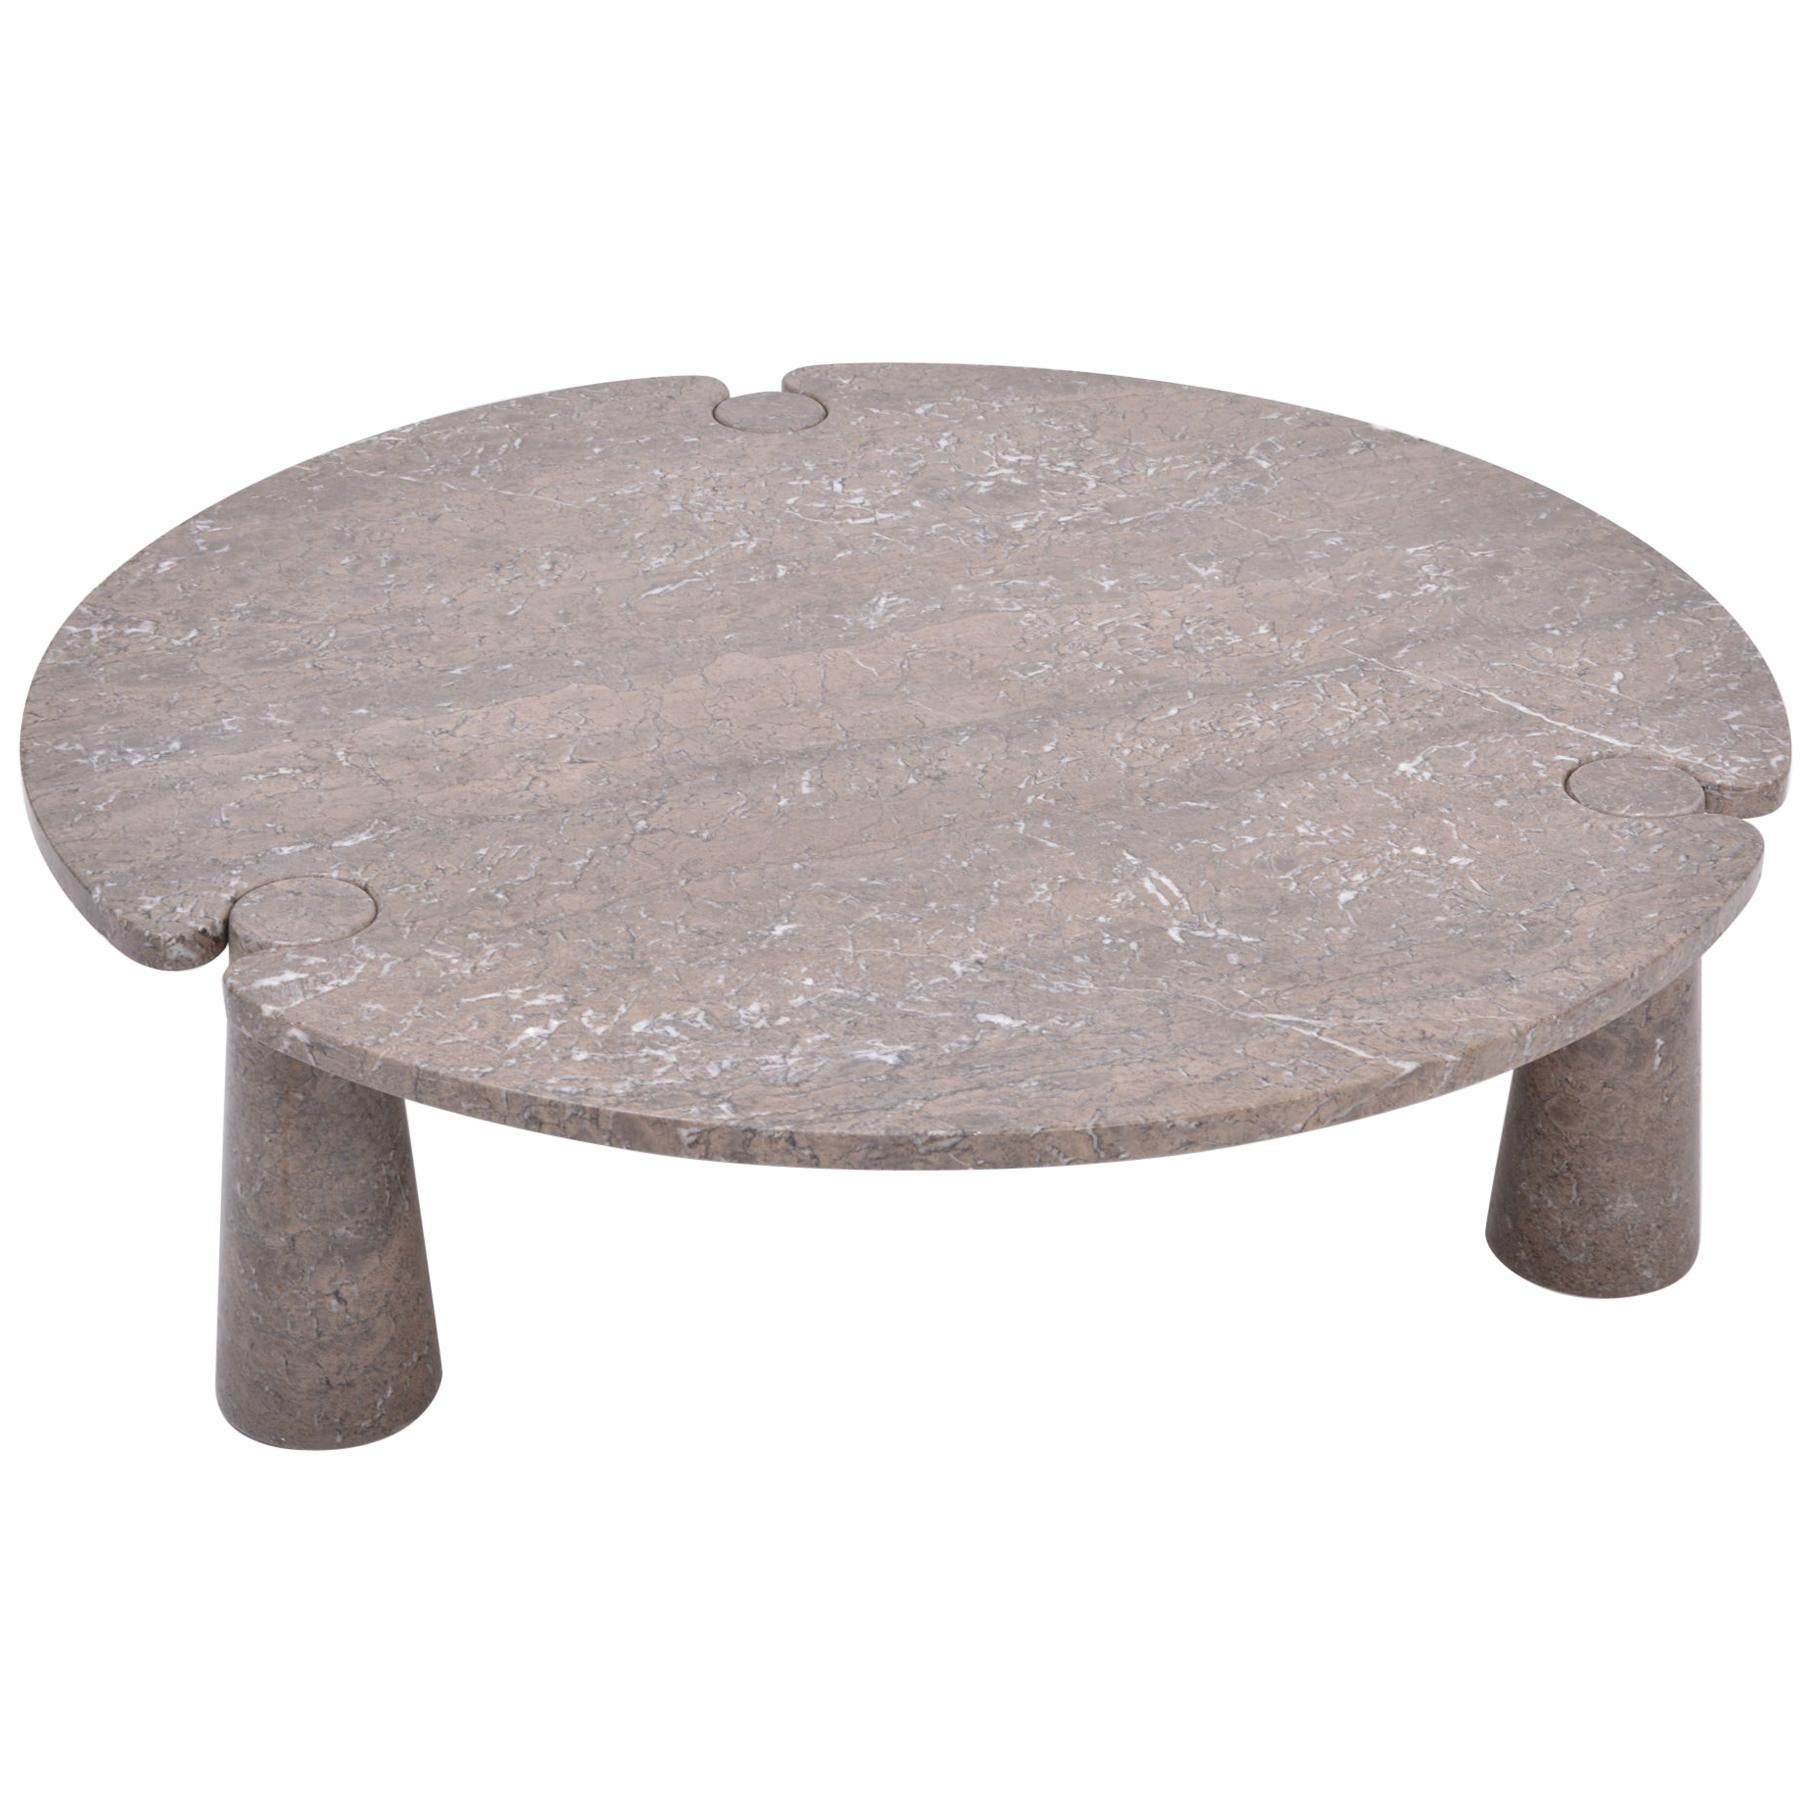 Large Circular 'Eros' Marble Coffee Table by Angelo Mangiarotti for Skipper